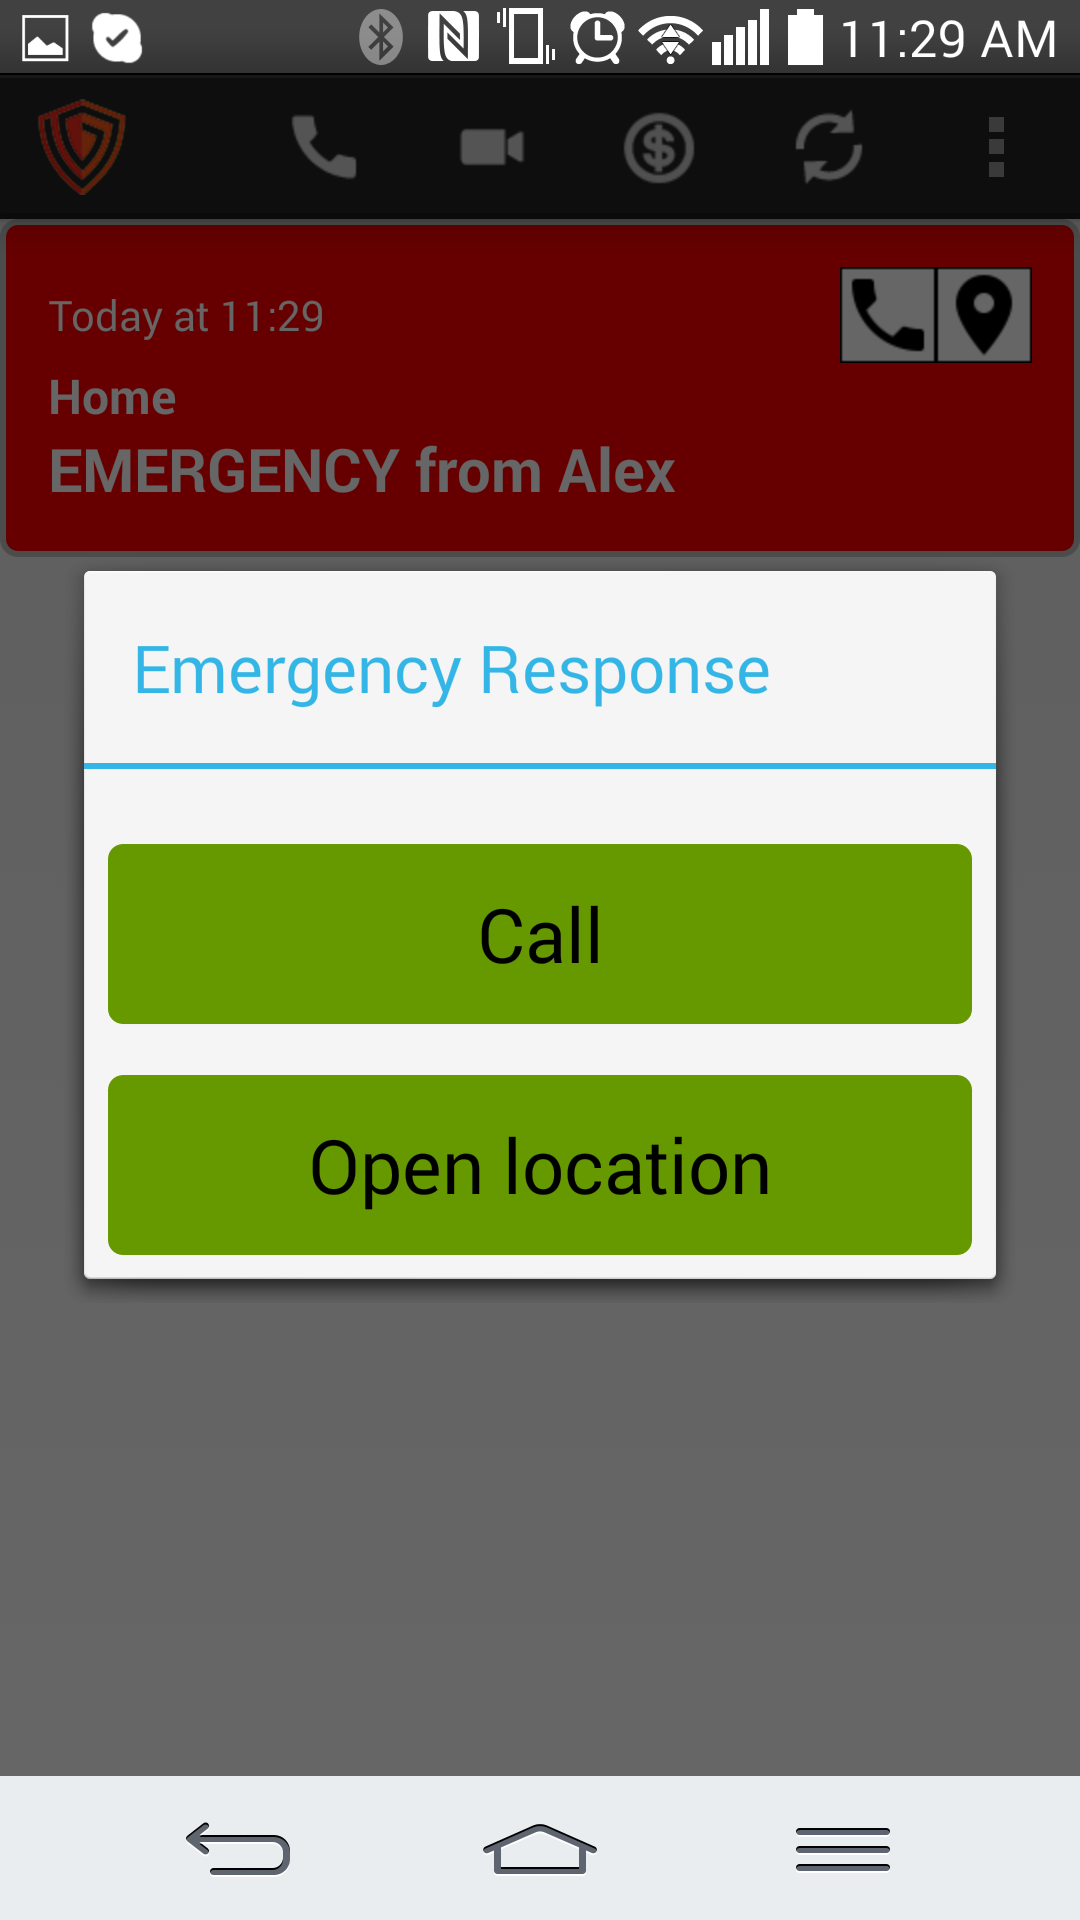 Response Options to Emergency